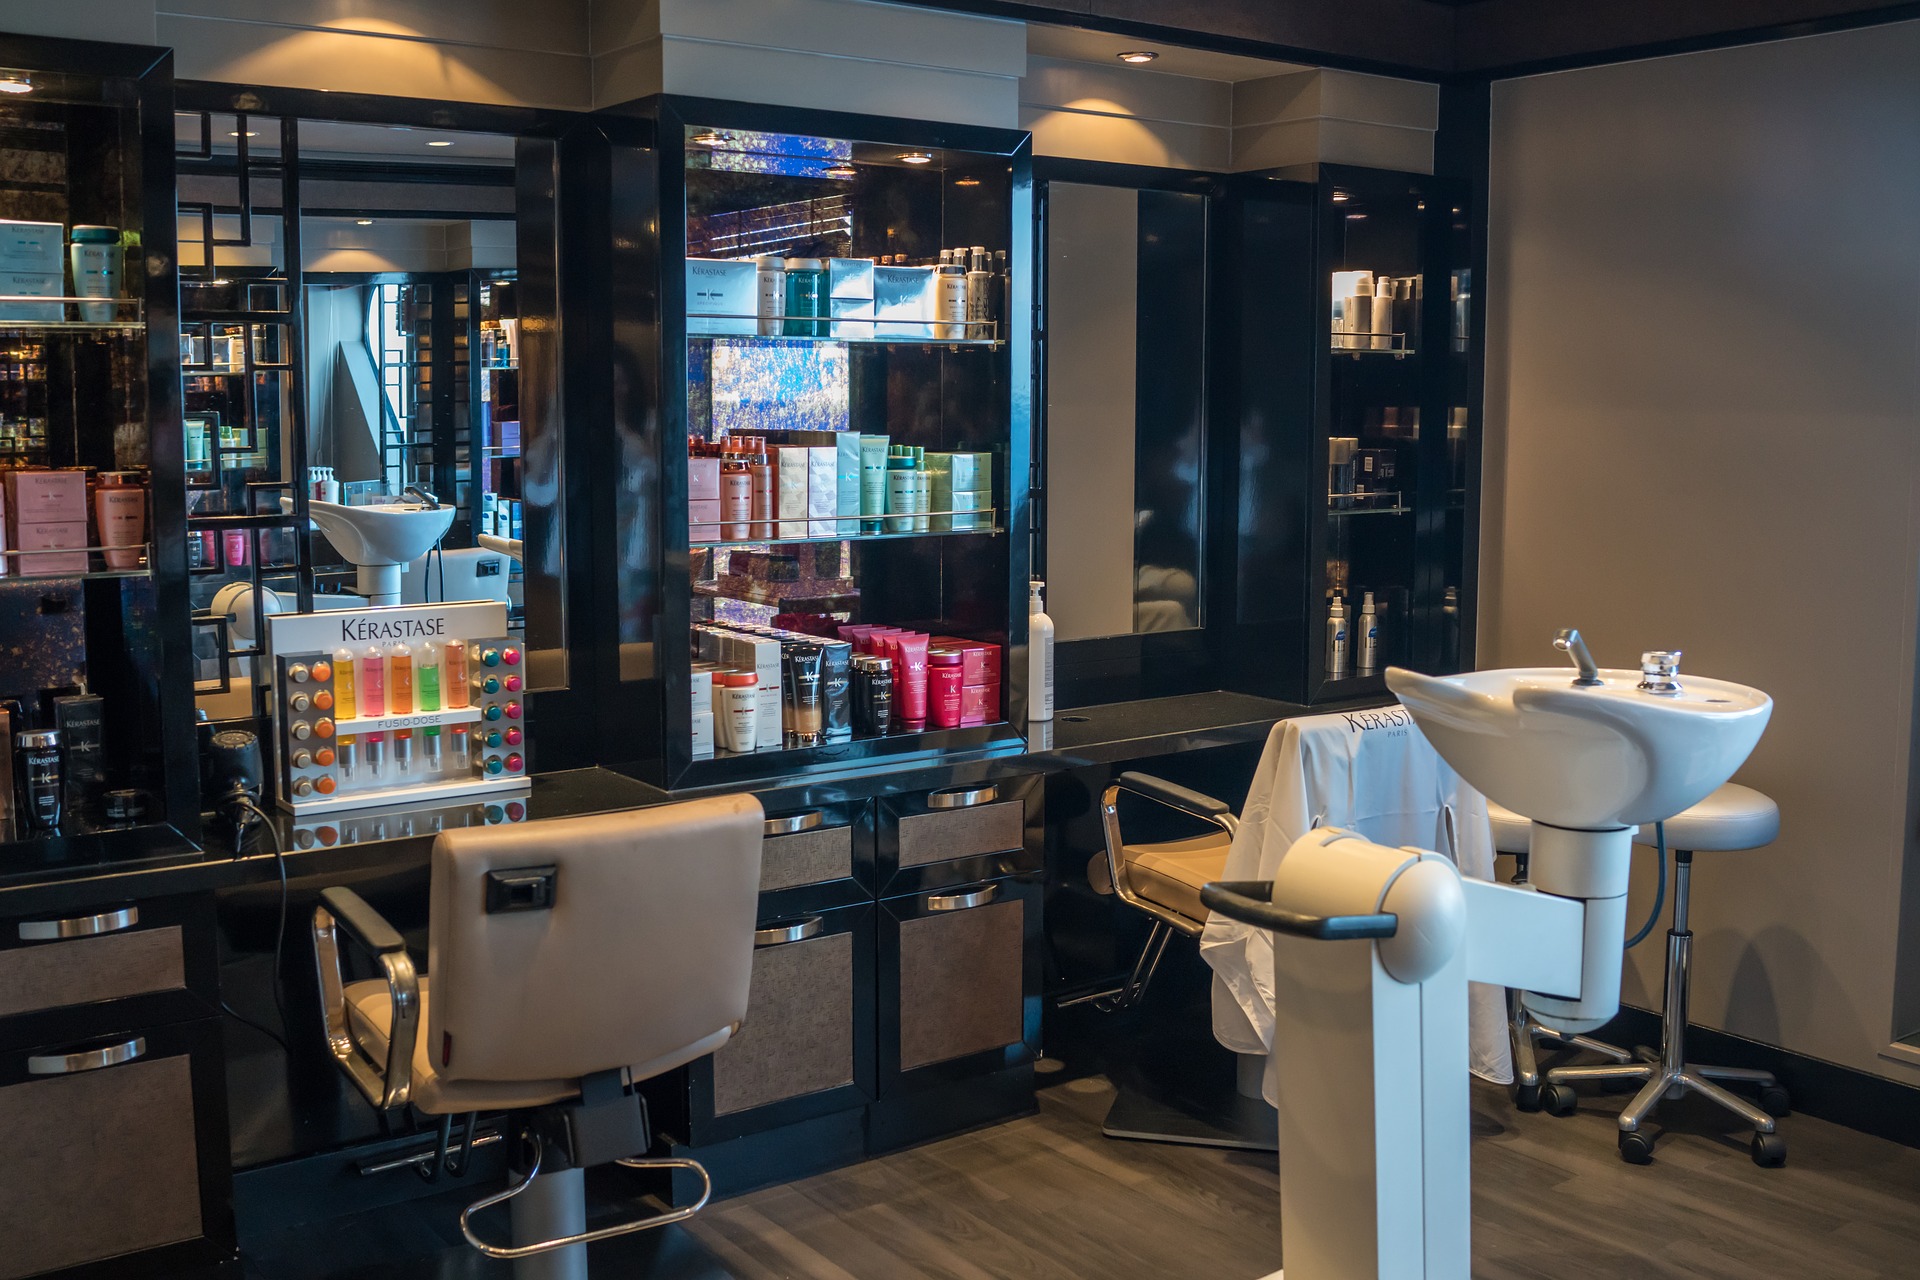 Rent a Chair or Hire Employees for Your Salon? 